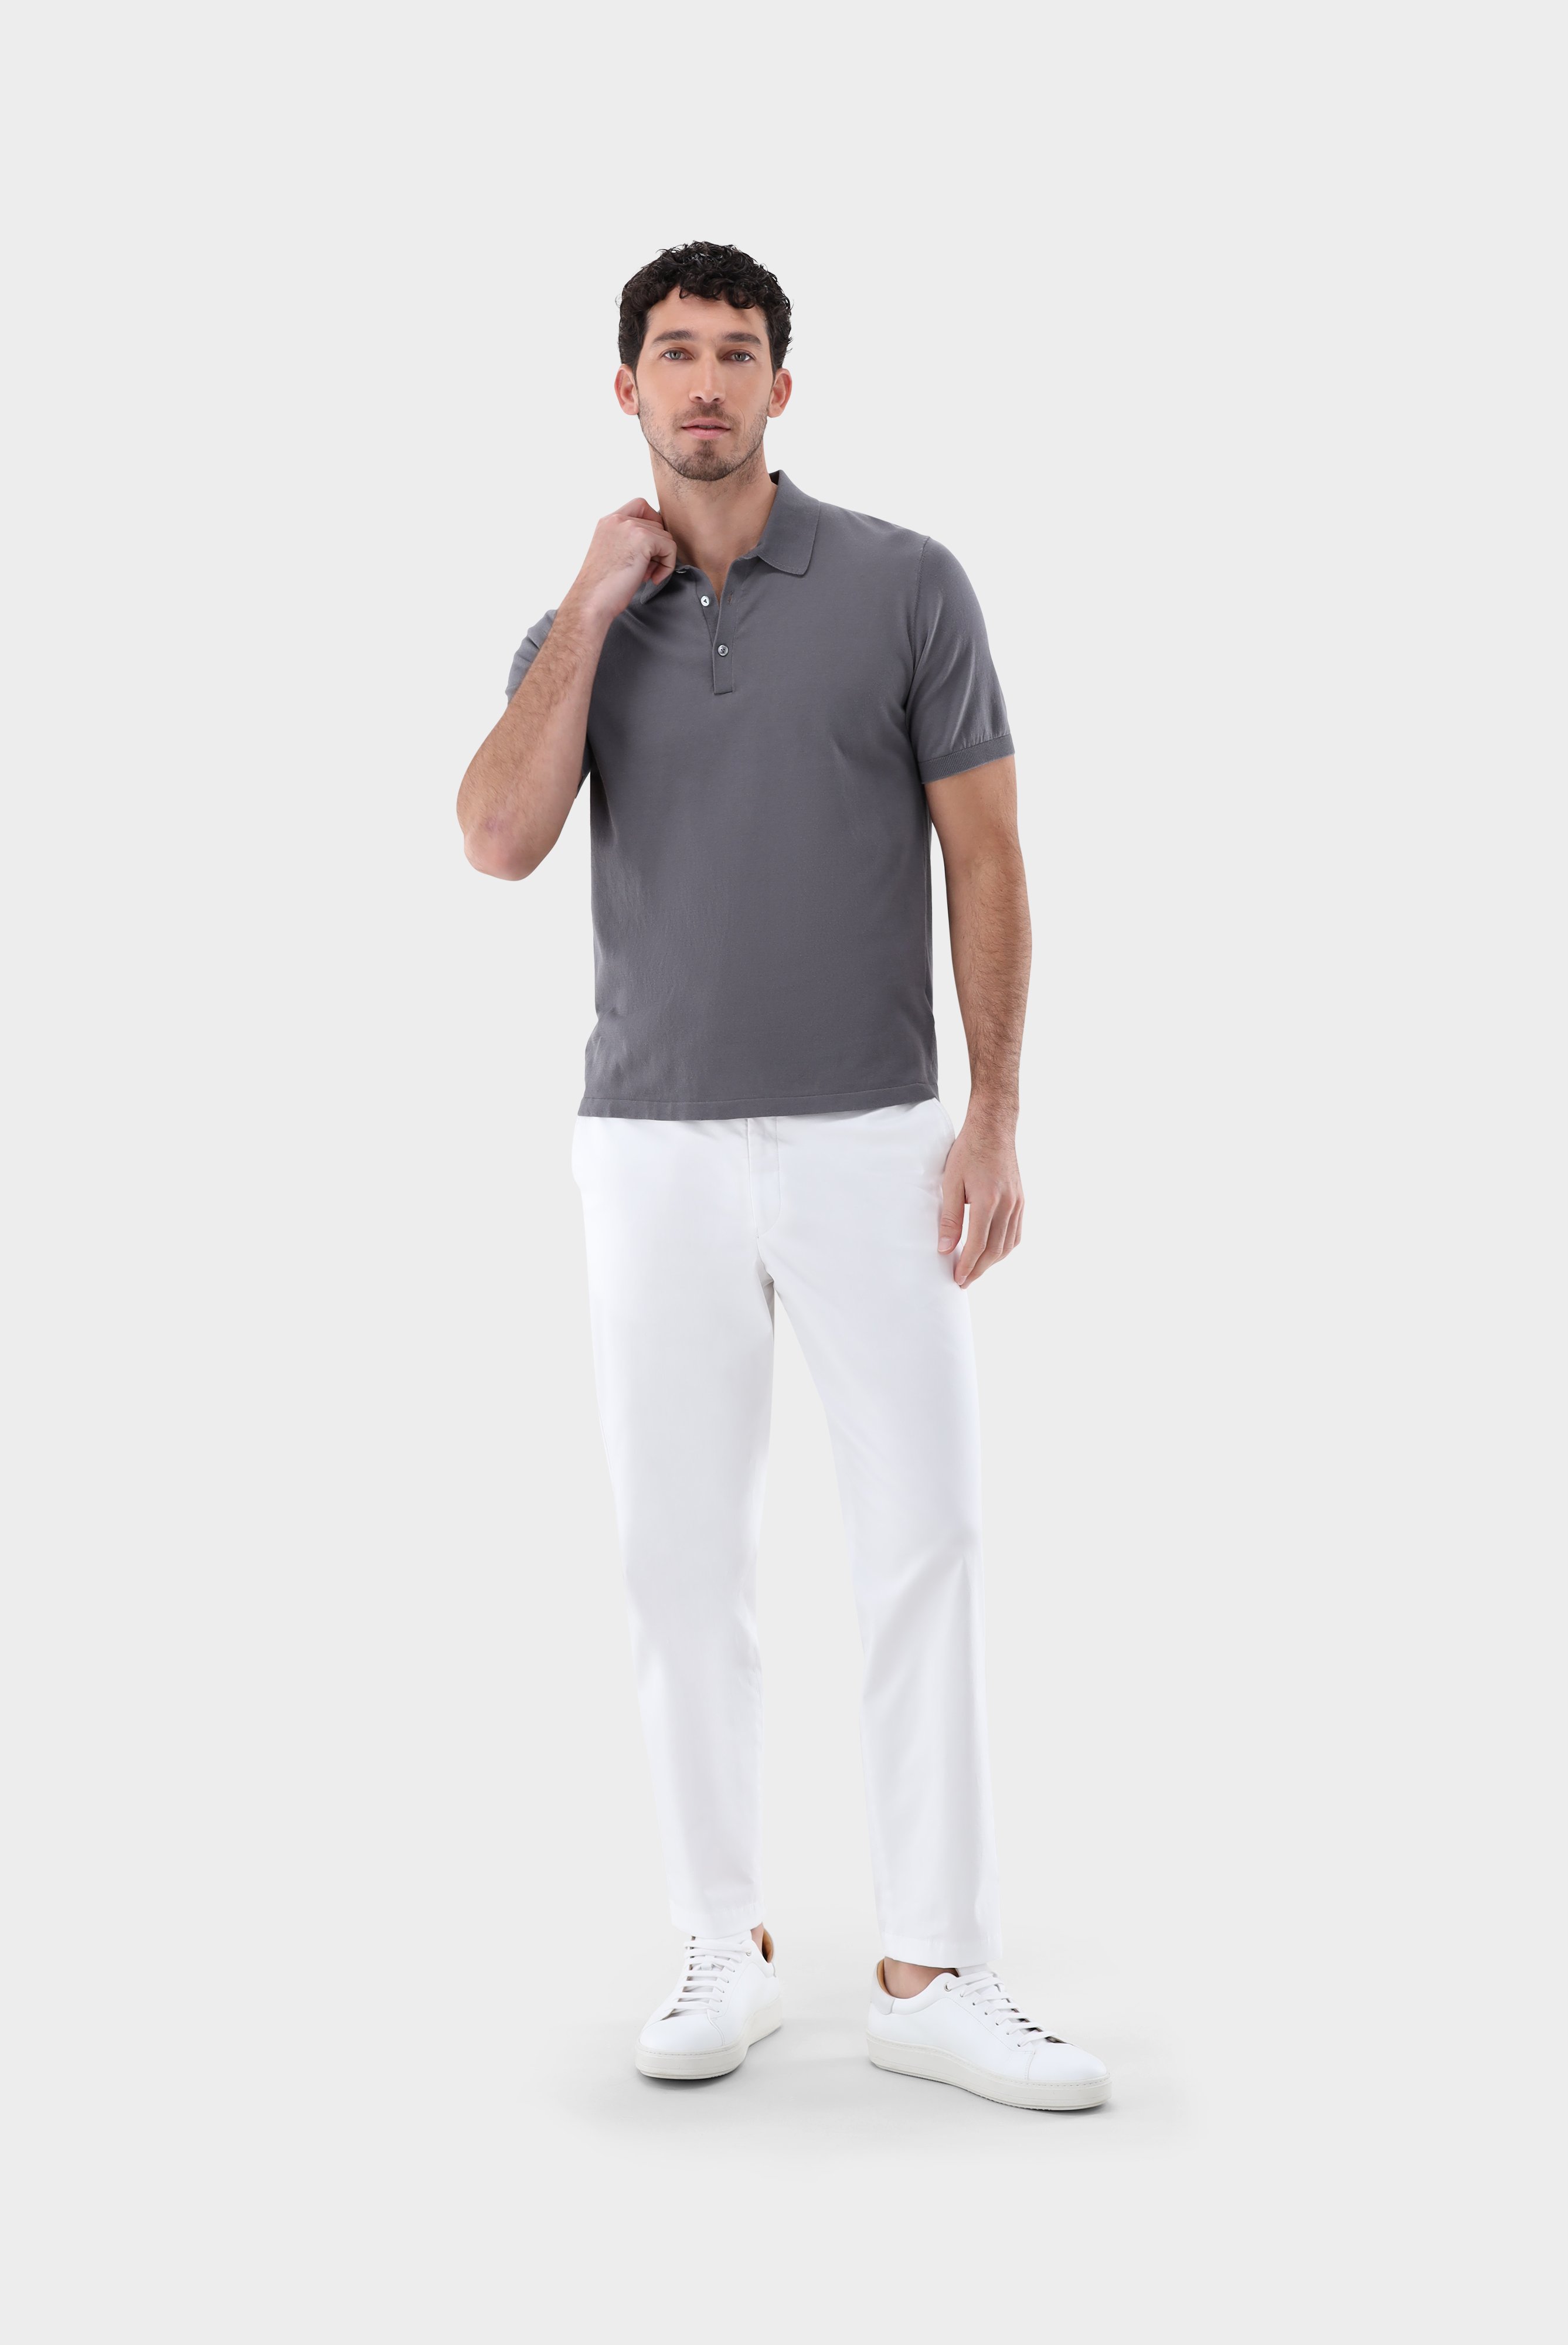 Poloshirts+Knit Polo made of Air Cotton+82.8510..S00174.070.L